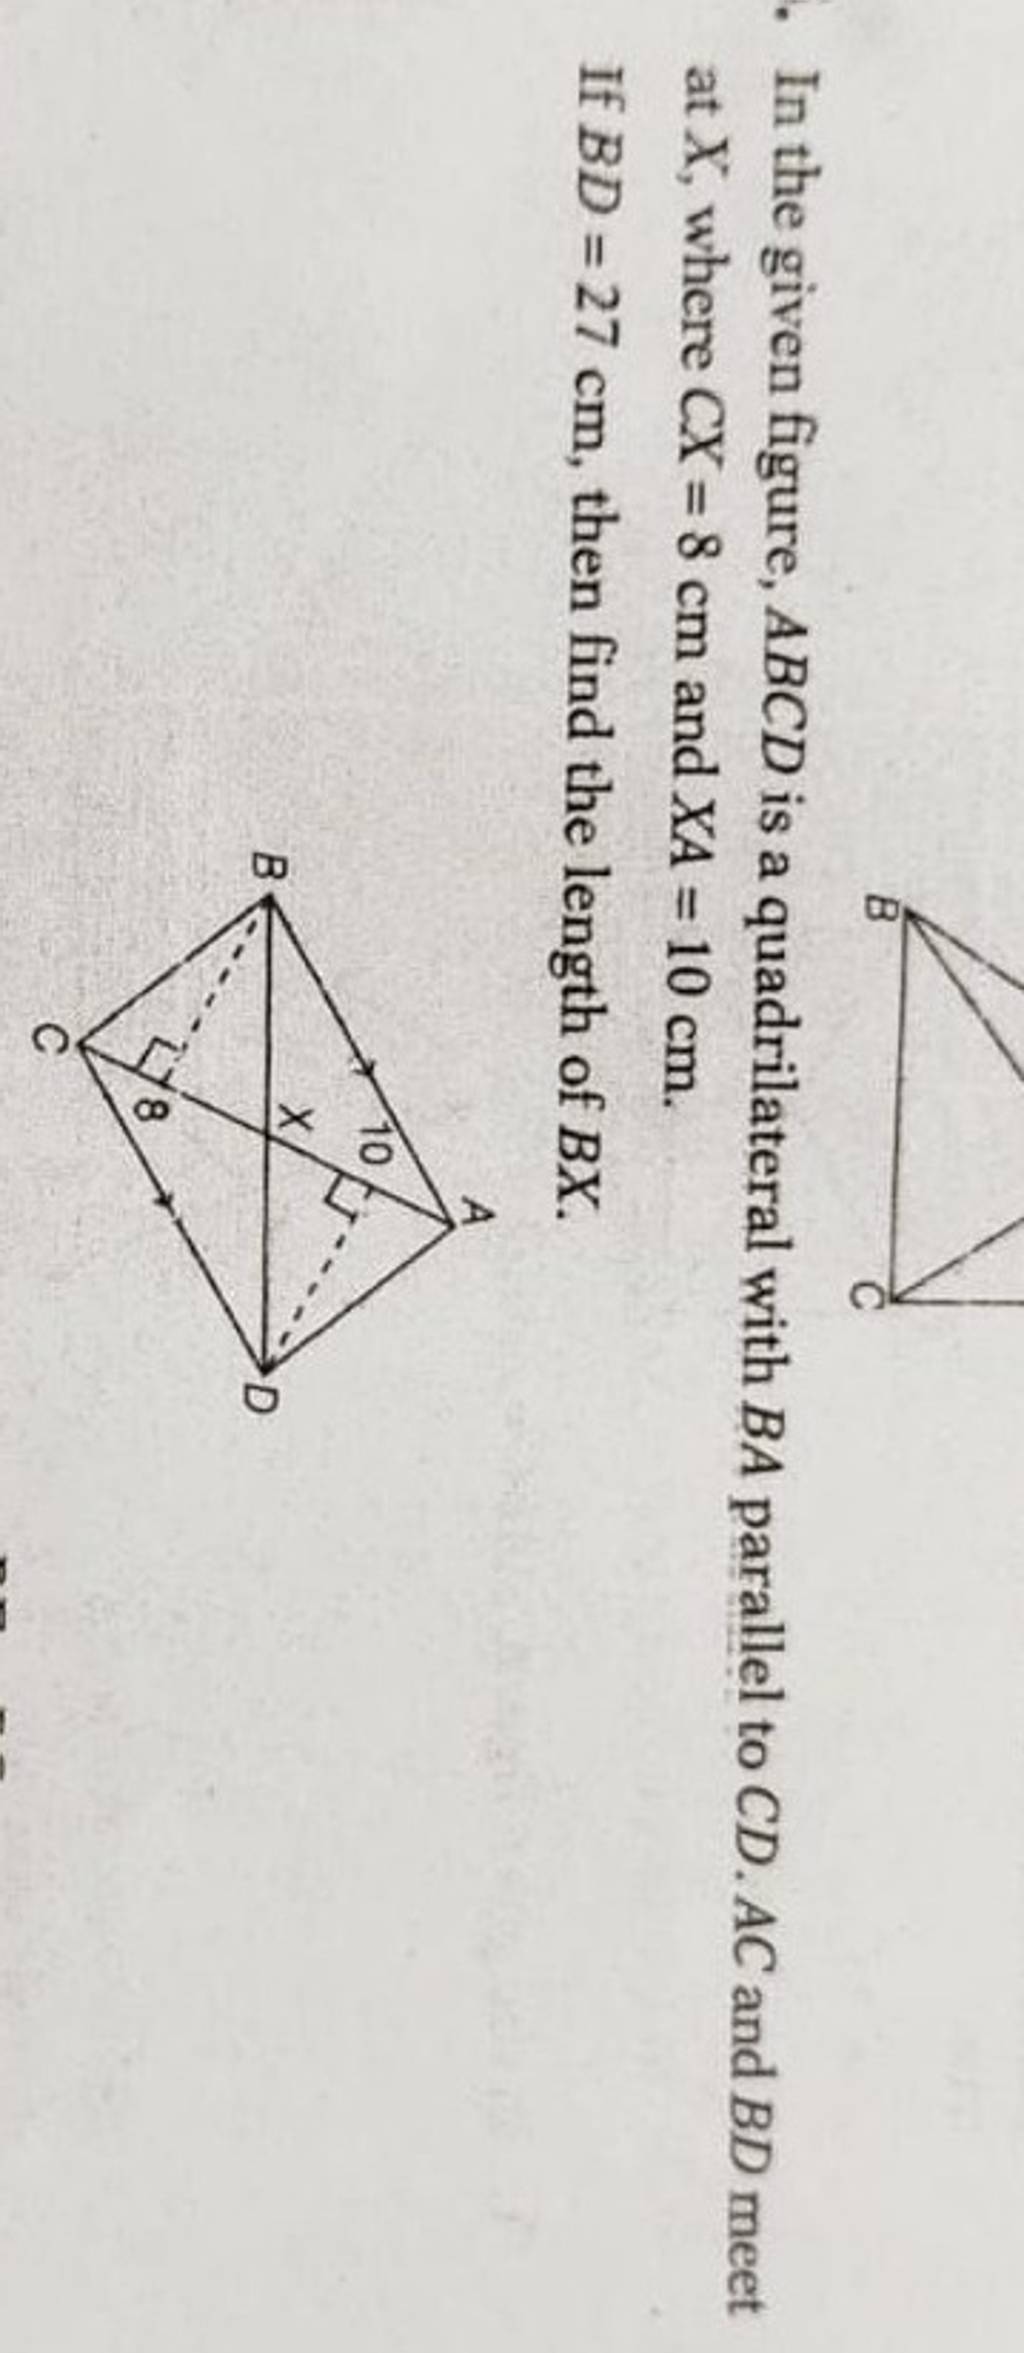 In The Given Figure Abcd Is A Quadrilateral With Ba Parallel To Cdac An 3800